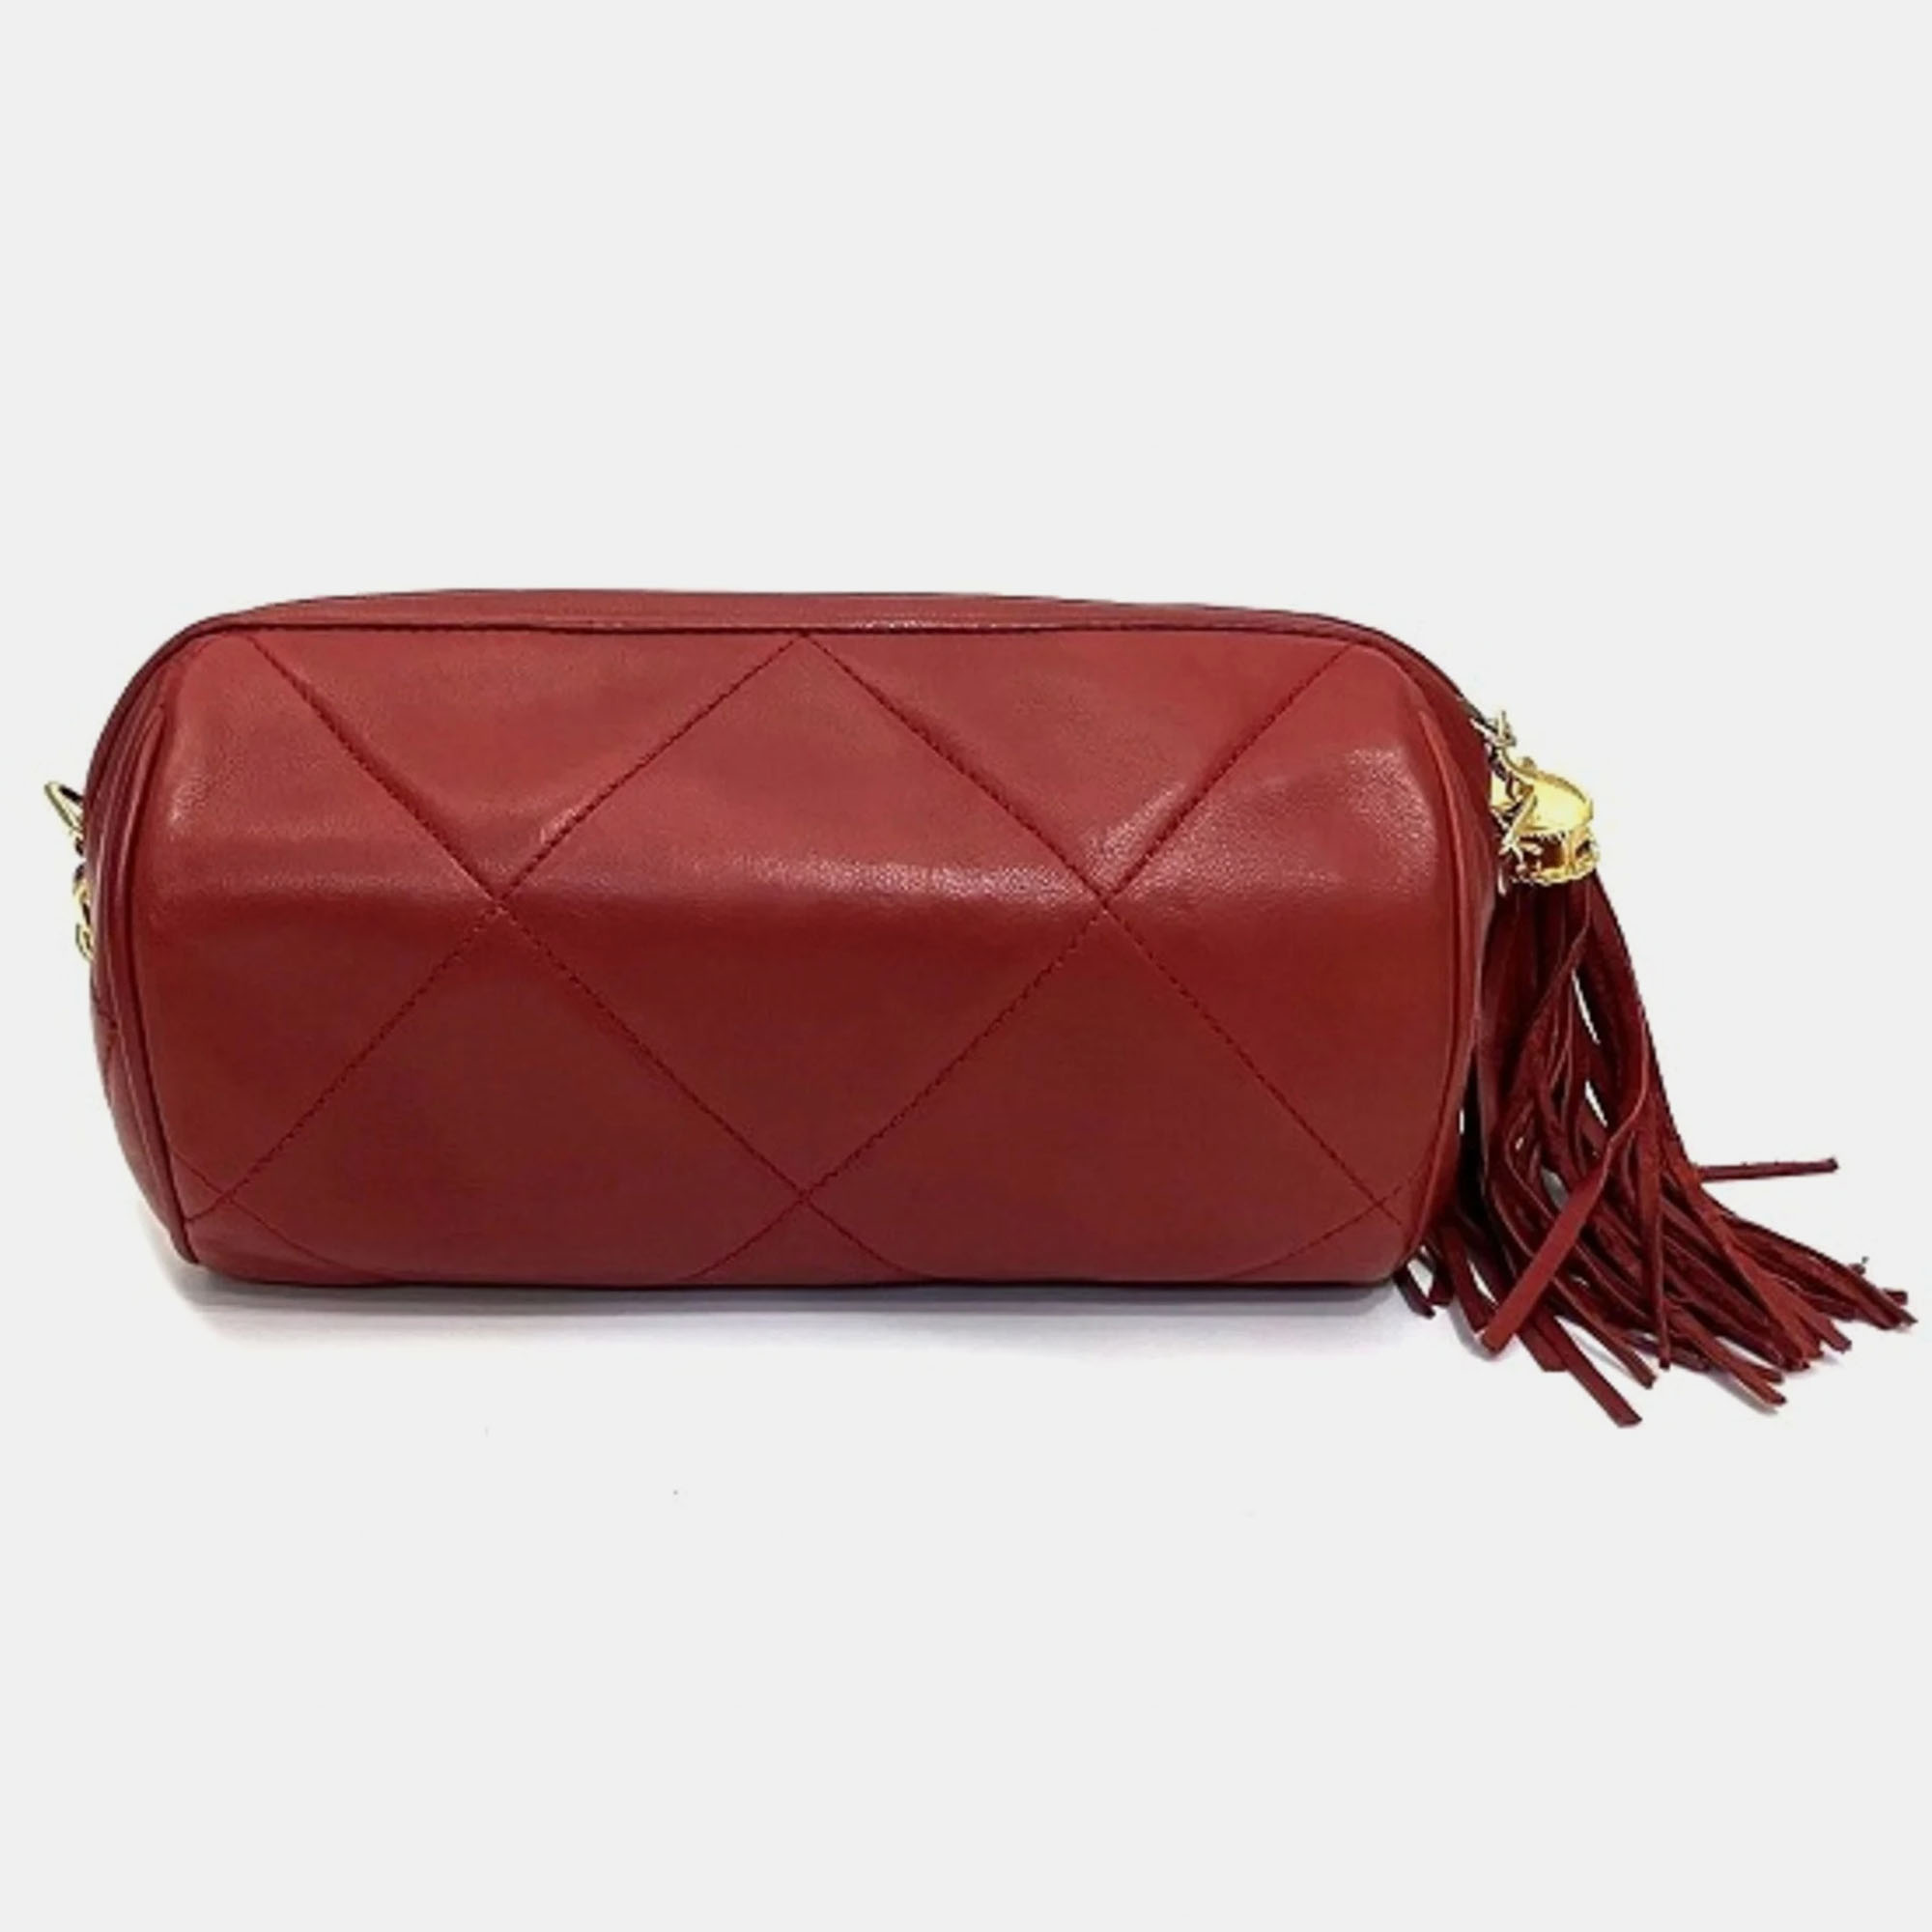 

CHANEL Red Leather Quilted Tassel Barrel Bag